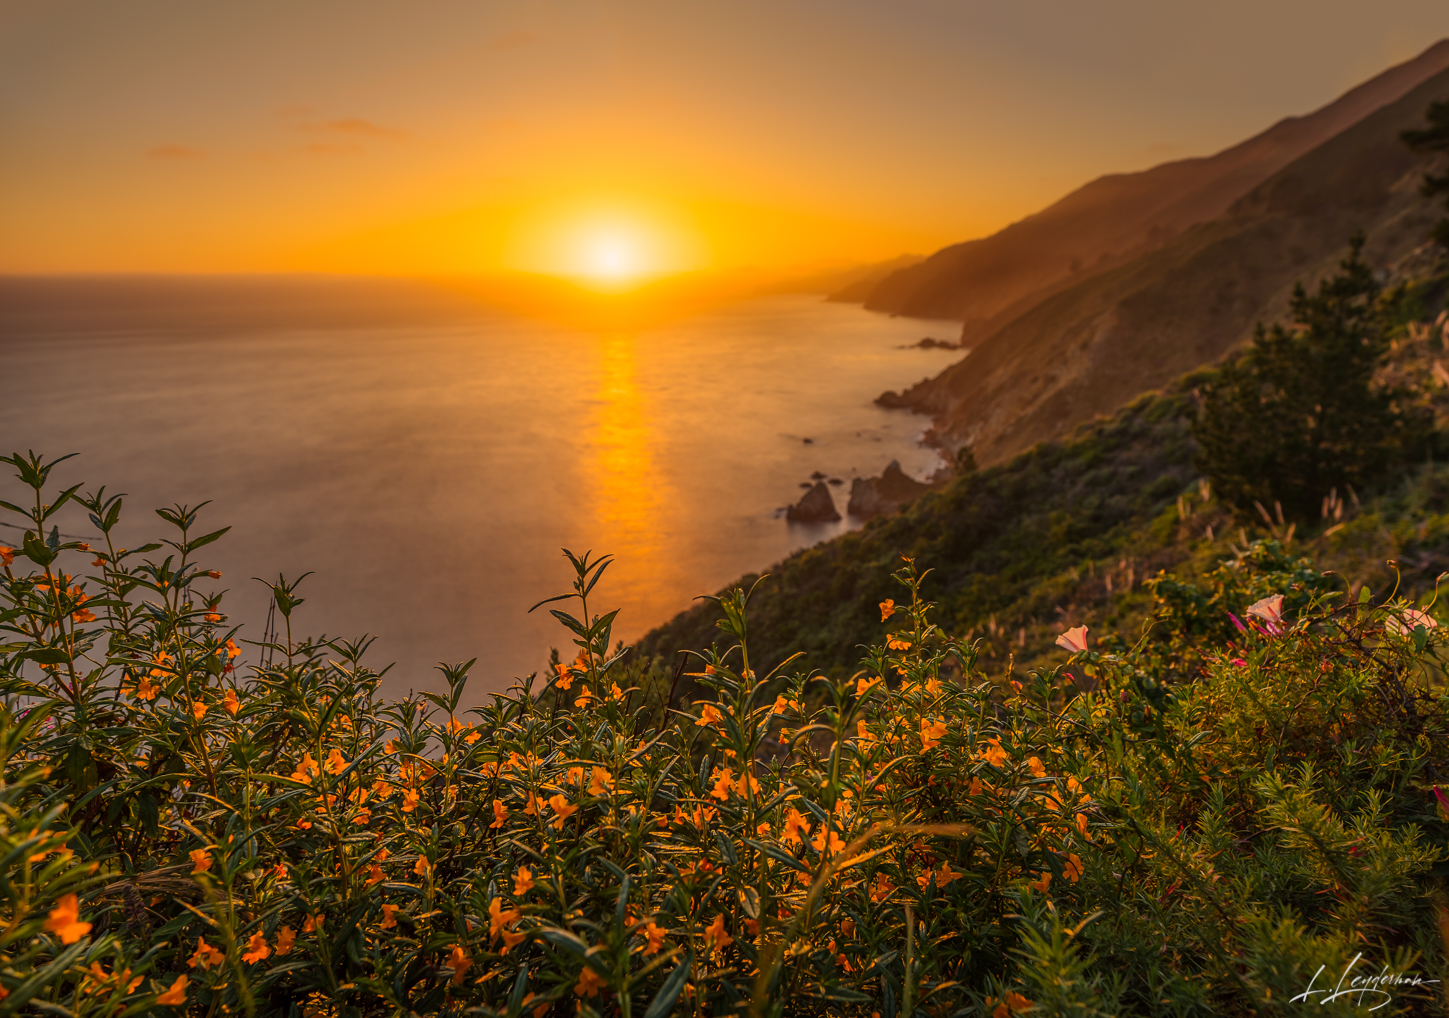 The sun's final bow ignites the coastal poppies in a fiery backlight, a natural spectacle that highlights the fiery spirit of...